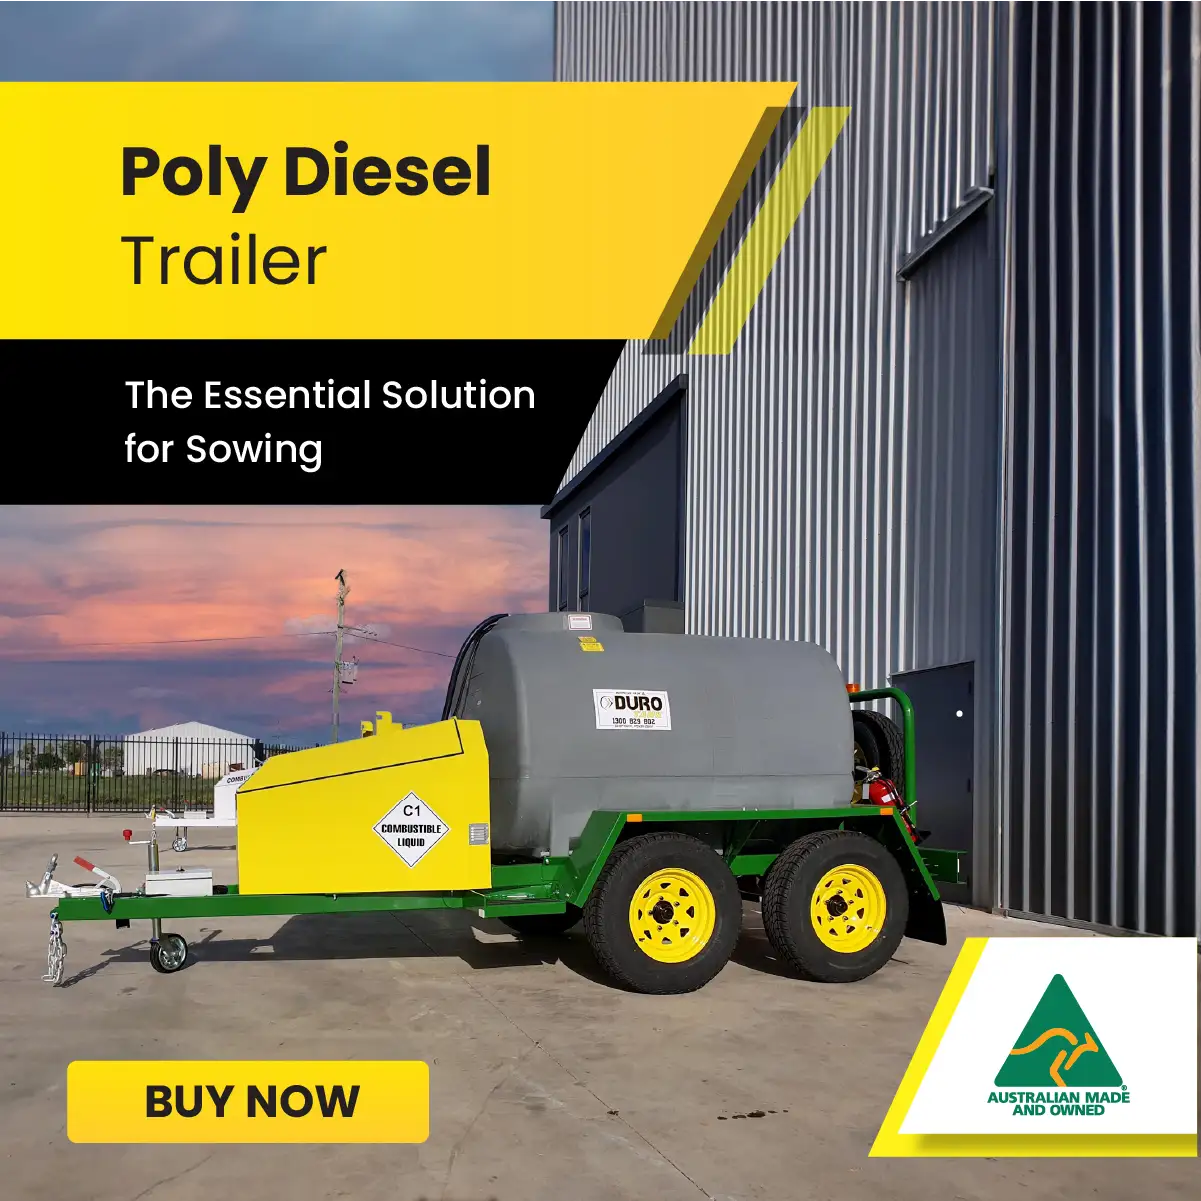 Durotank Poly Diesel Trailer for Sowing